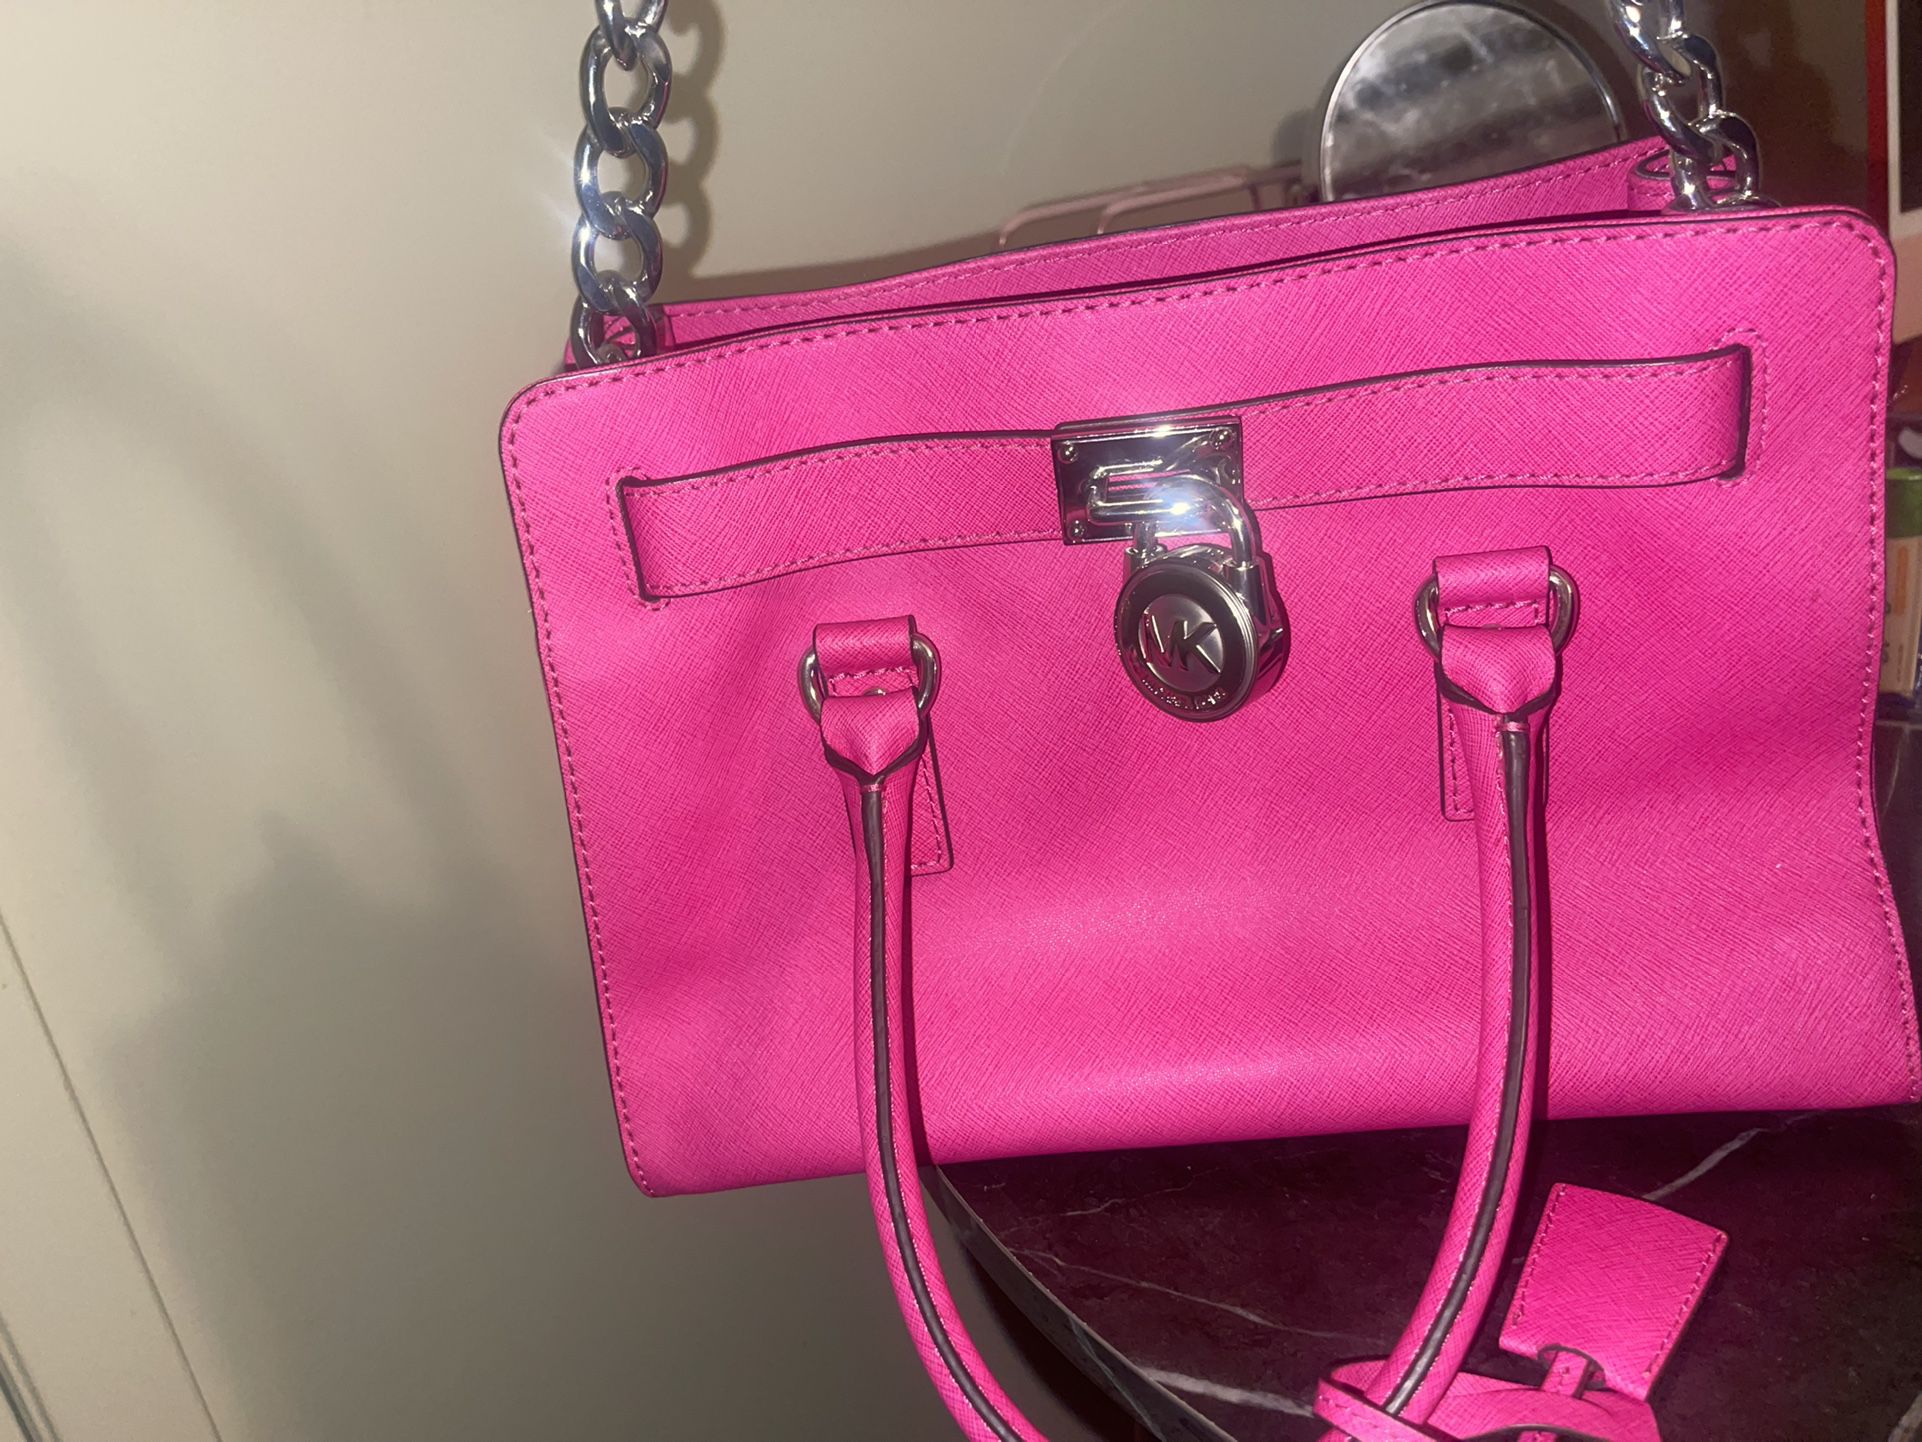 Hot Pink Michael Kors Purse for Sale in Austin, TX - OfferUp